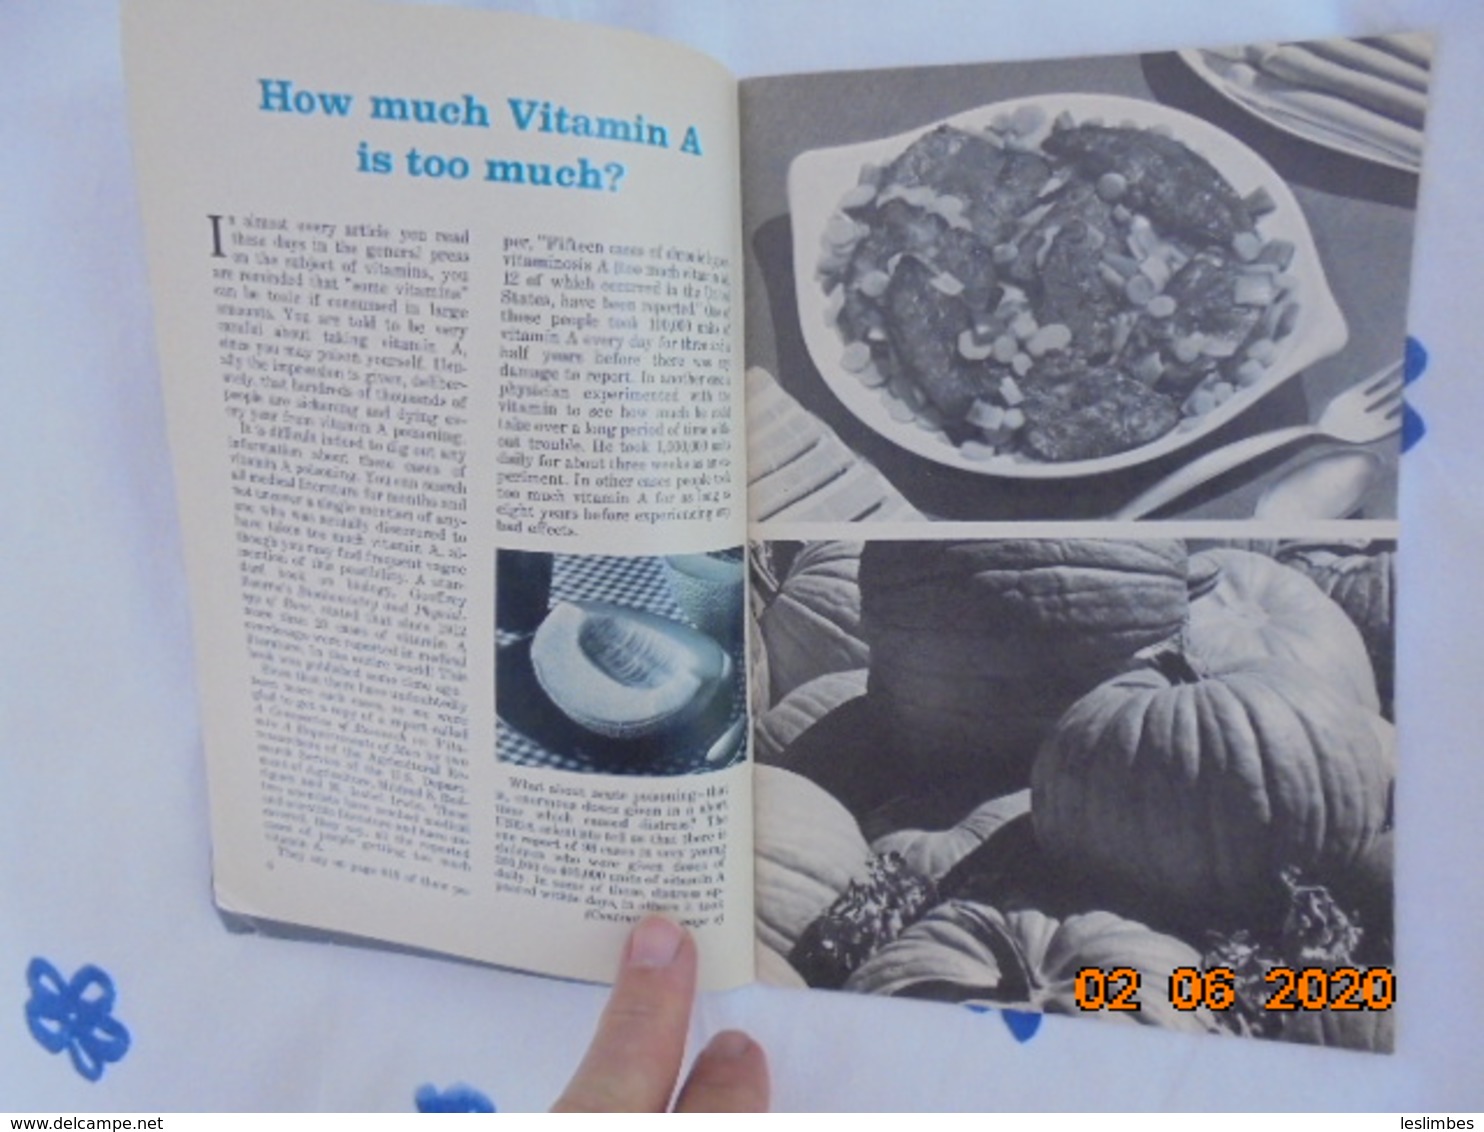 Today's Living, Volume 7 (April 1976) Number 4. Syndicate Magazines / Howard's Nutrition Of Newport Beach - Médecine Alternative